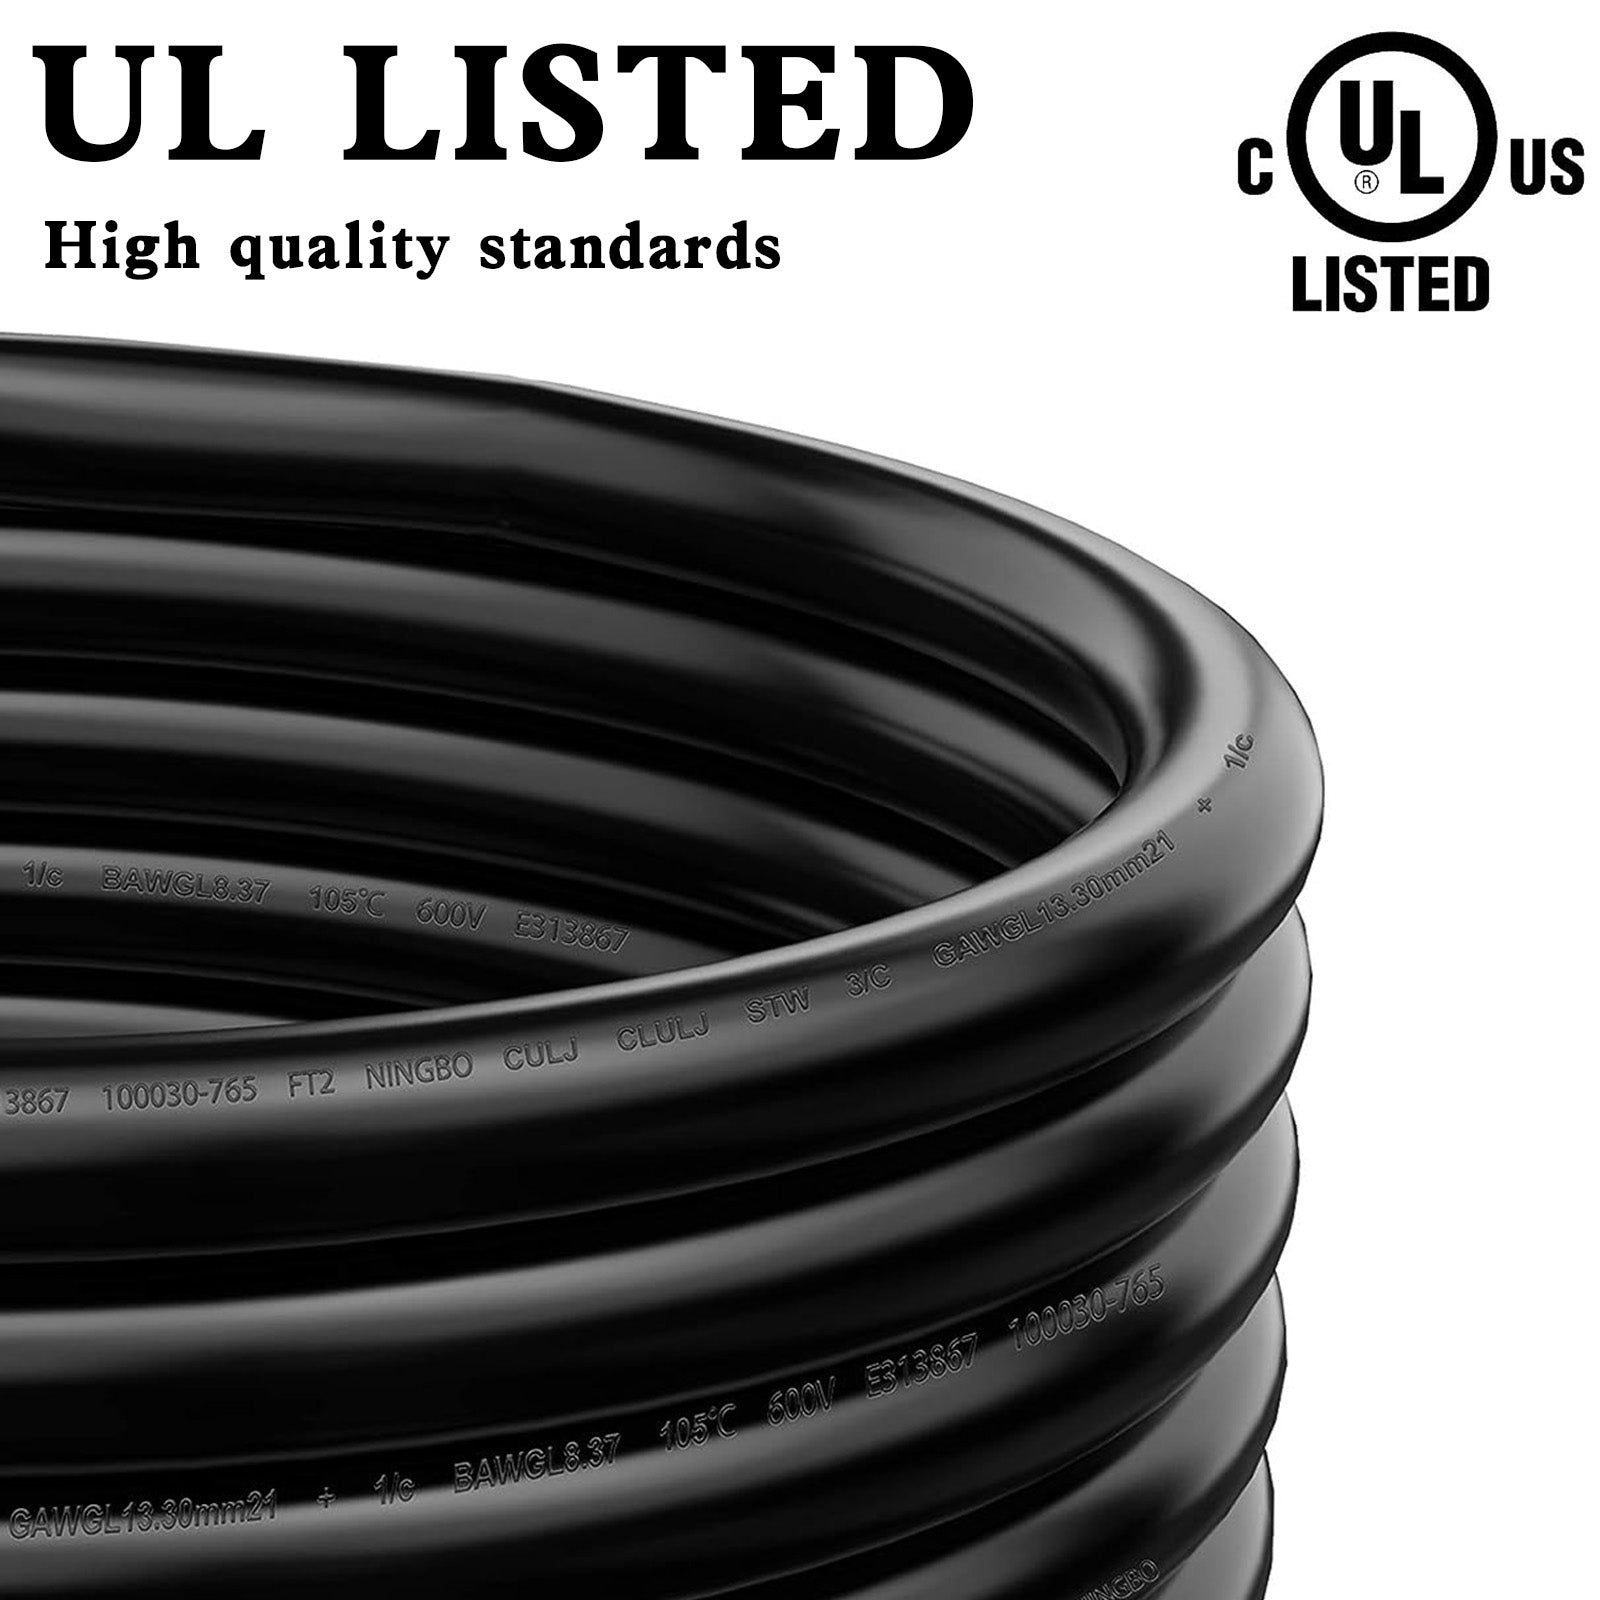 RV Camper UL Listed 50 Amp 25 Ft RV/Generator Cord With Locking Connector